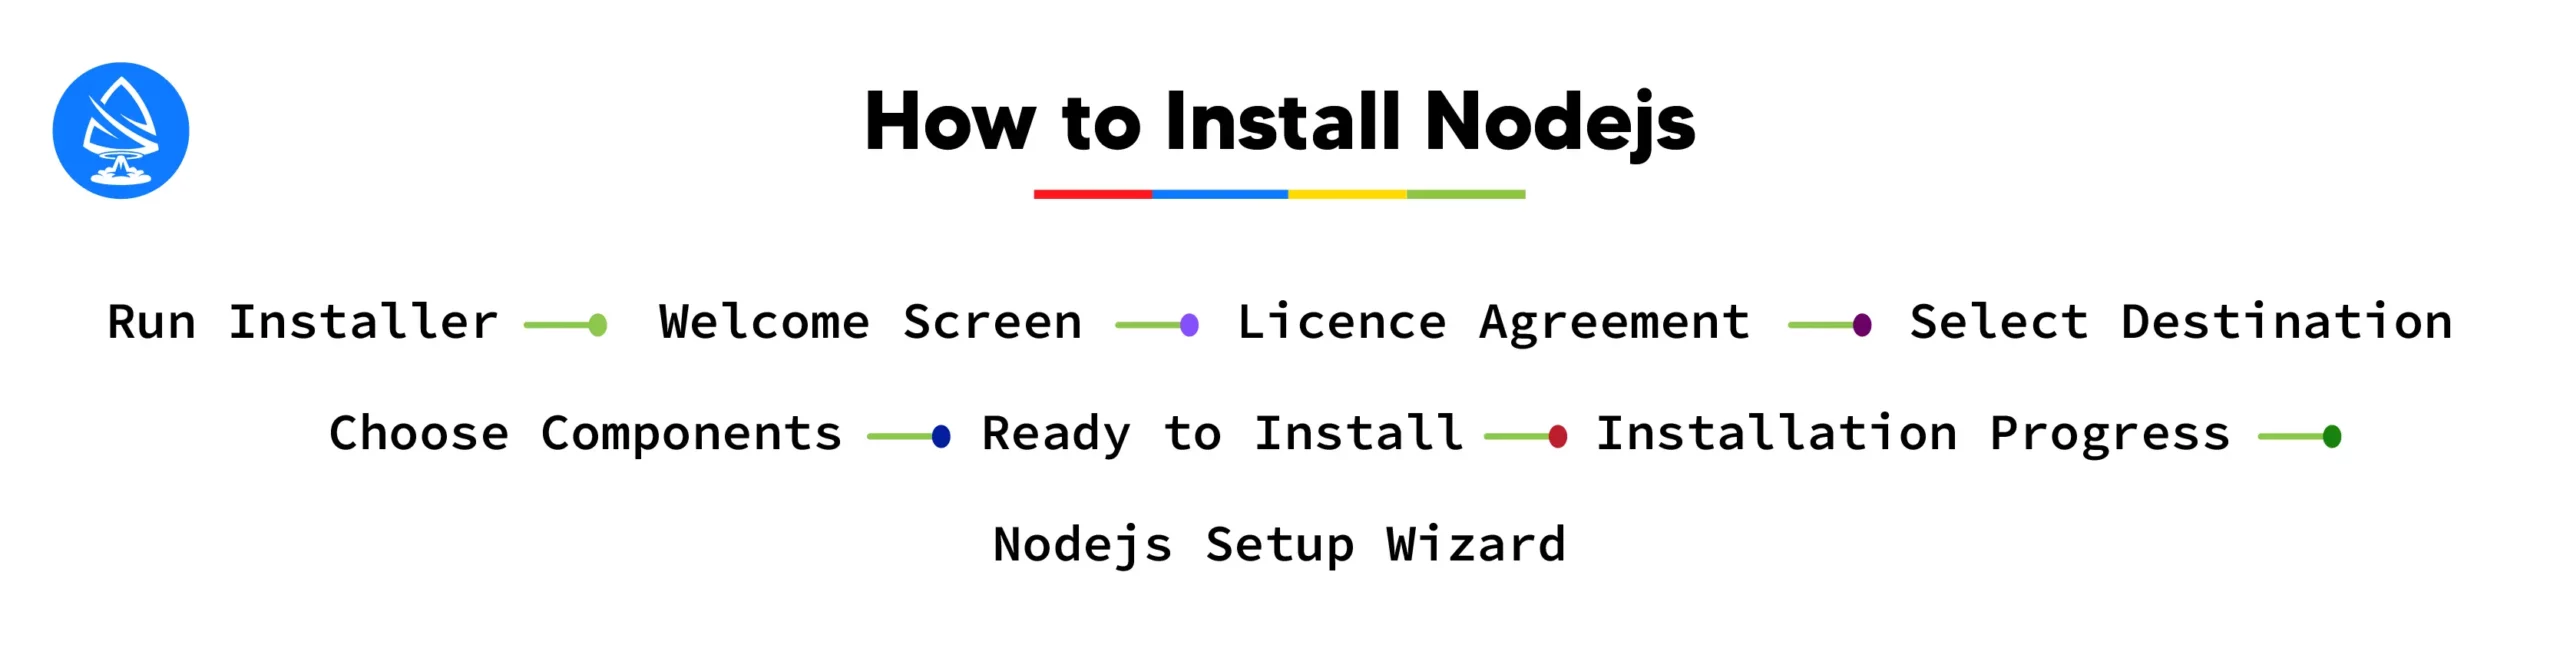 Step-by-Step Instructions for Installing Node.js Using the Downloaded Installer 